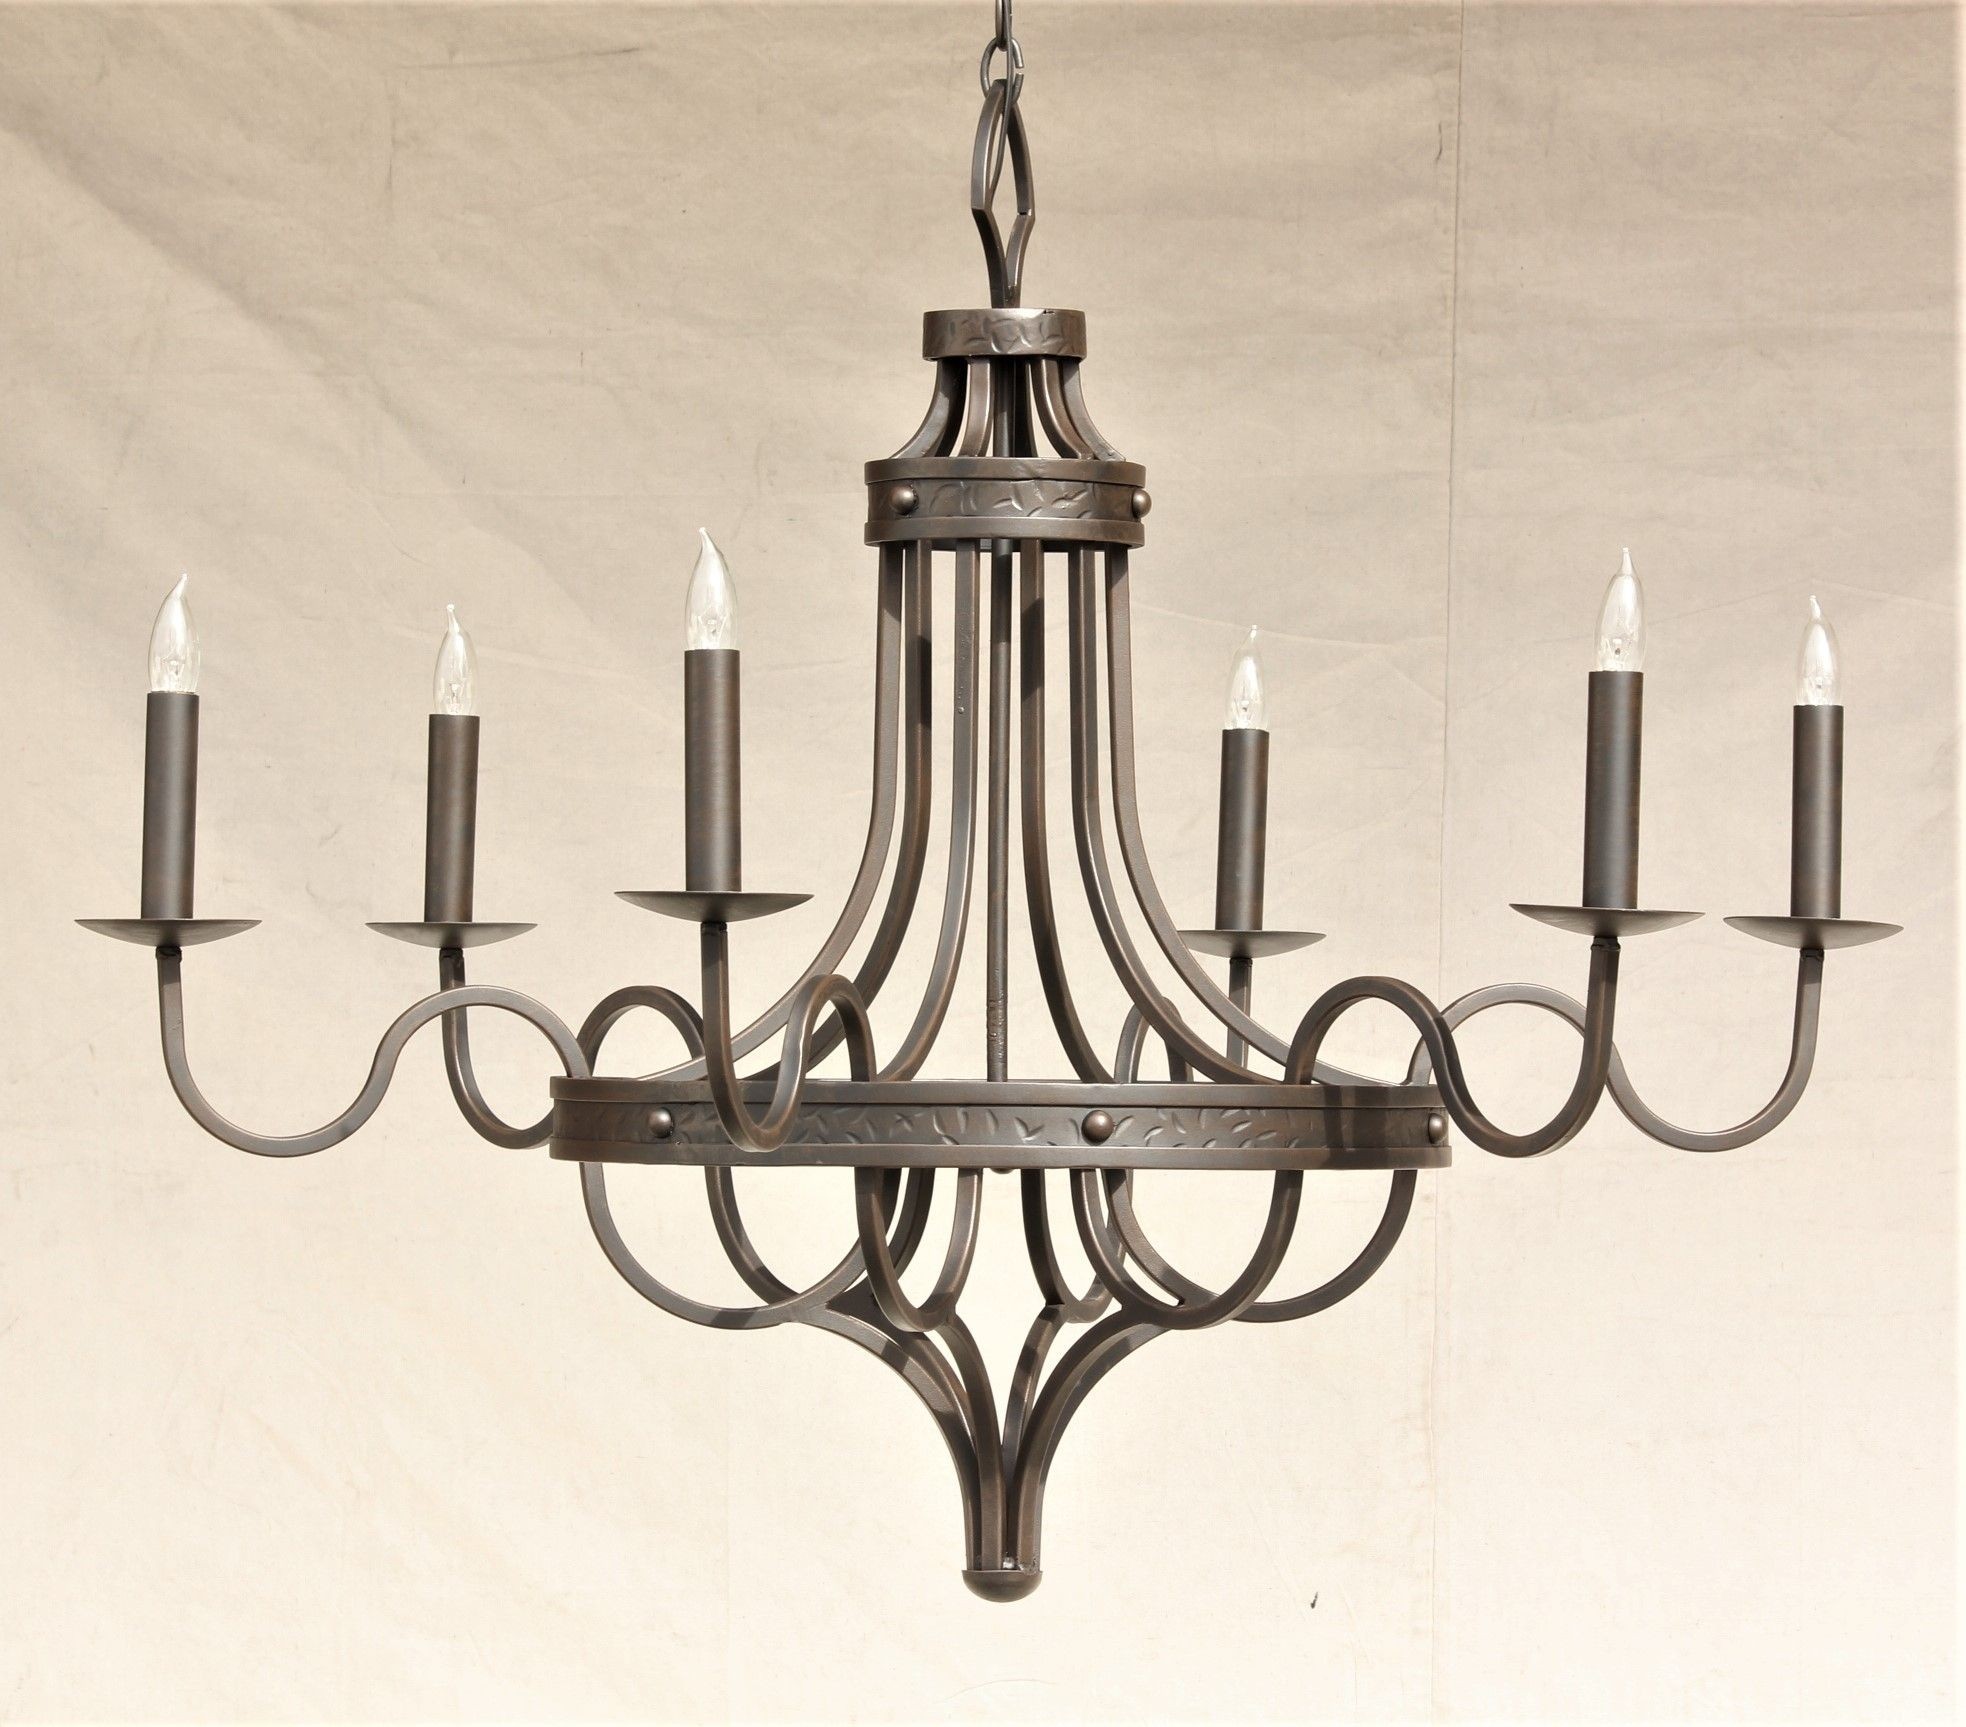 Lights of tuscany 1093 6 tuscan style chandelier 1